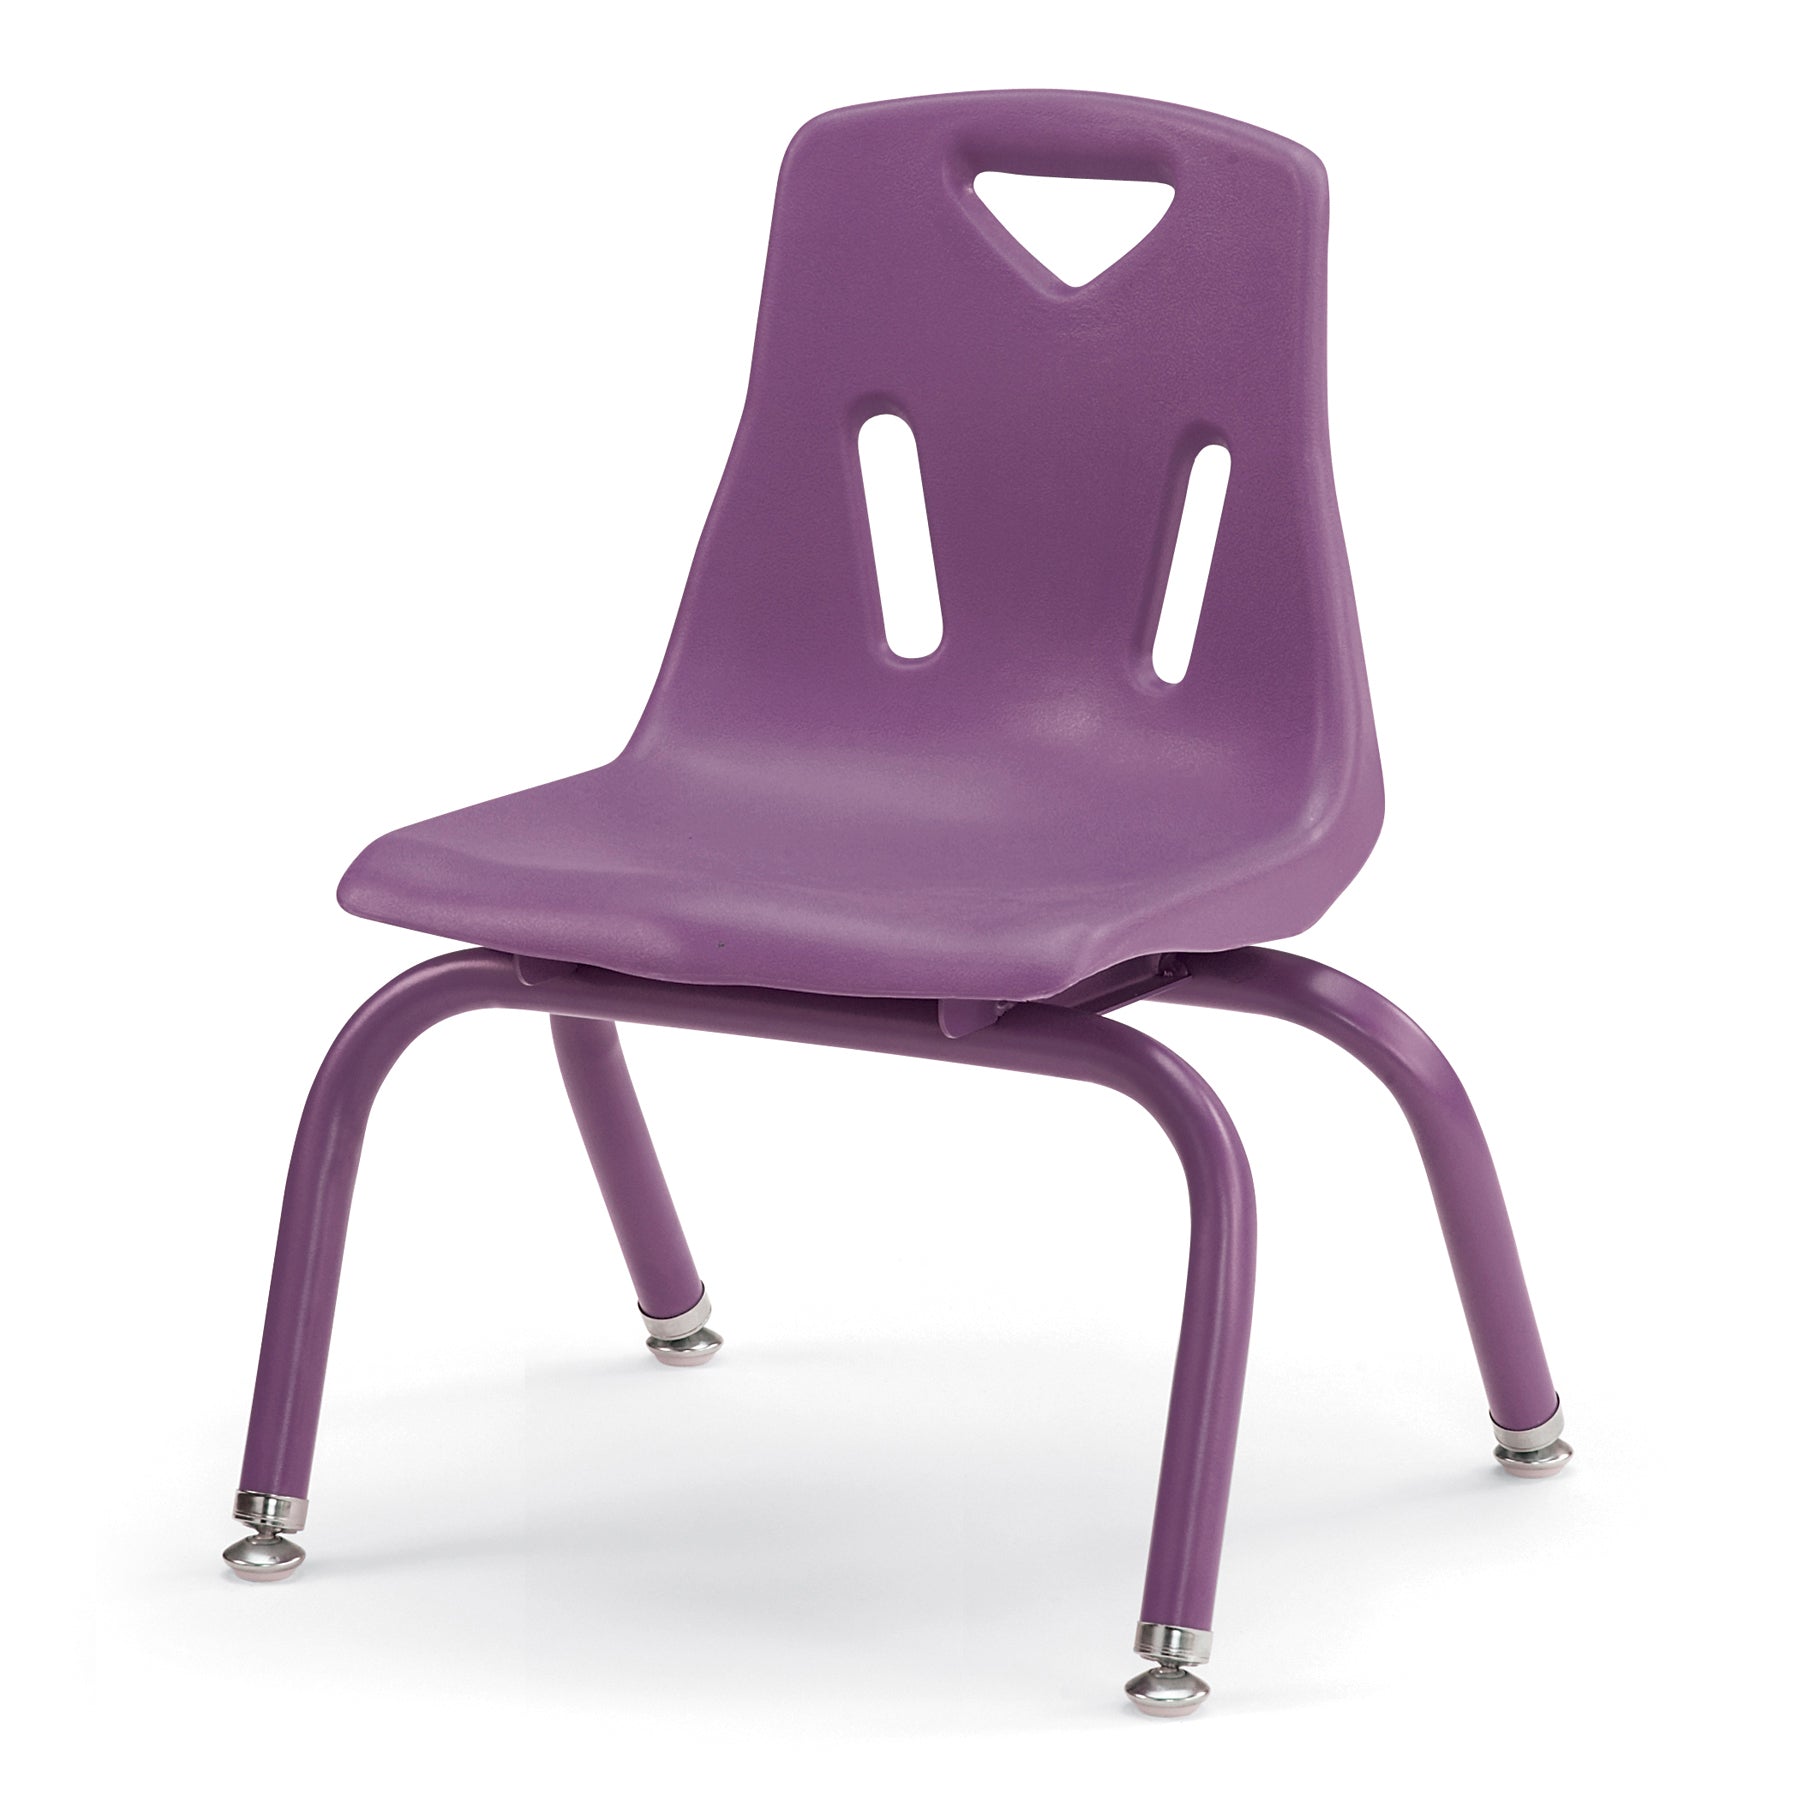 8120JC1004, Berries Stacking Chair with Powder-Coated Legs - 10" Ht - Purple